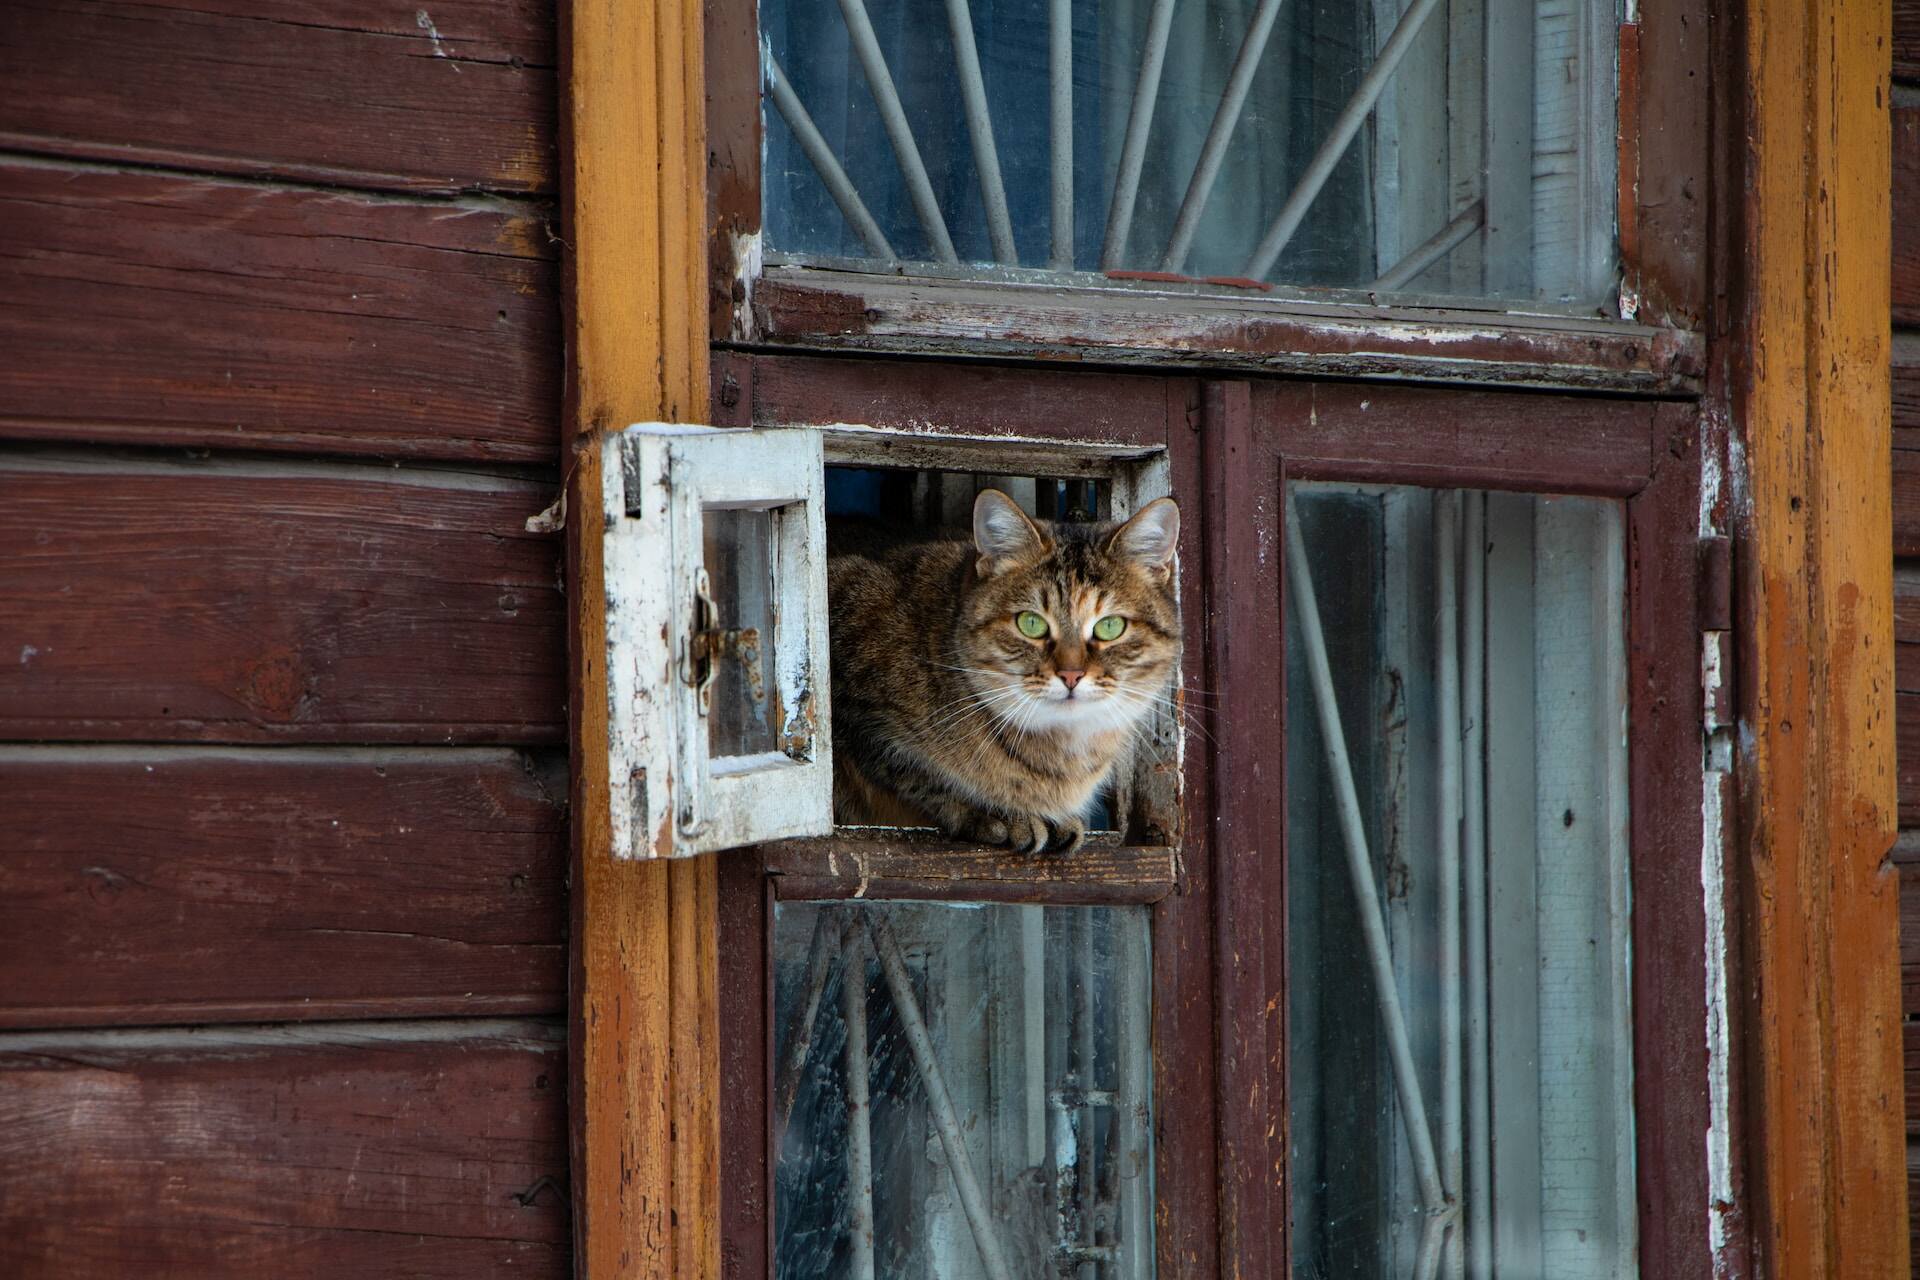 A cat peeking out of a window in a house